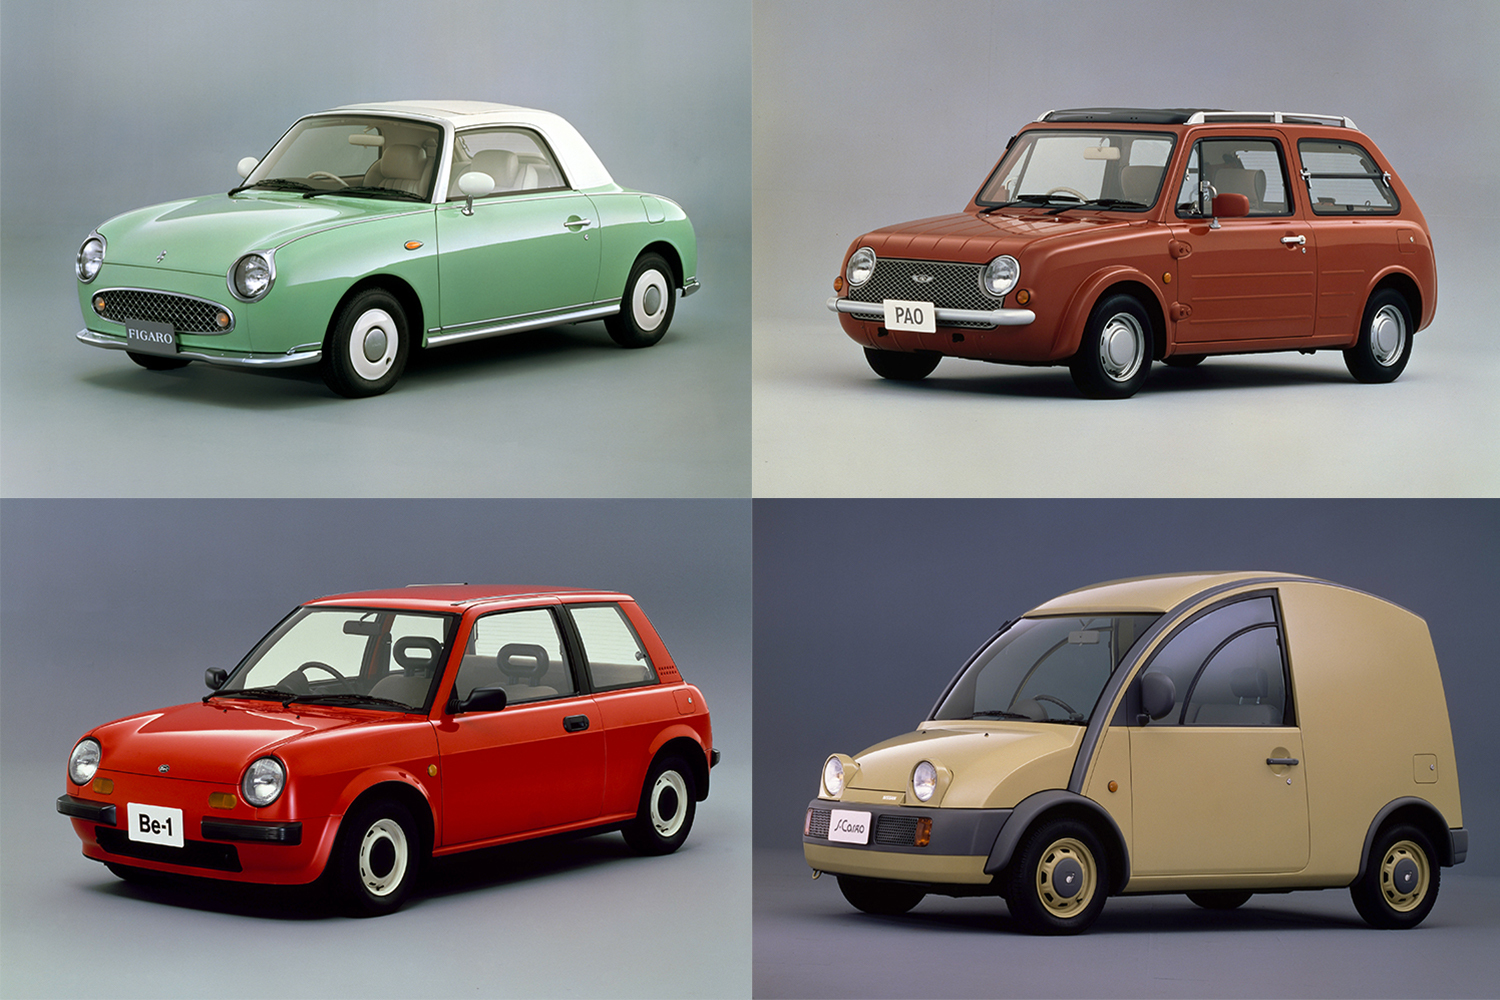 Nissan Pike Factory Cars: The Figaro, Pao, Be-1 and S-Cargo